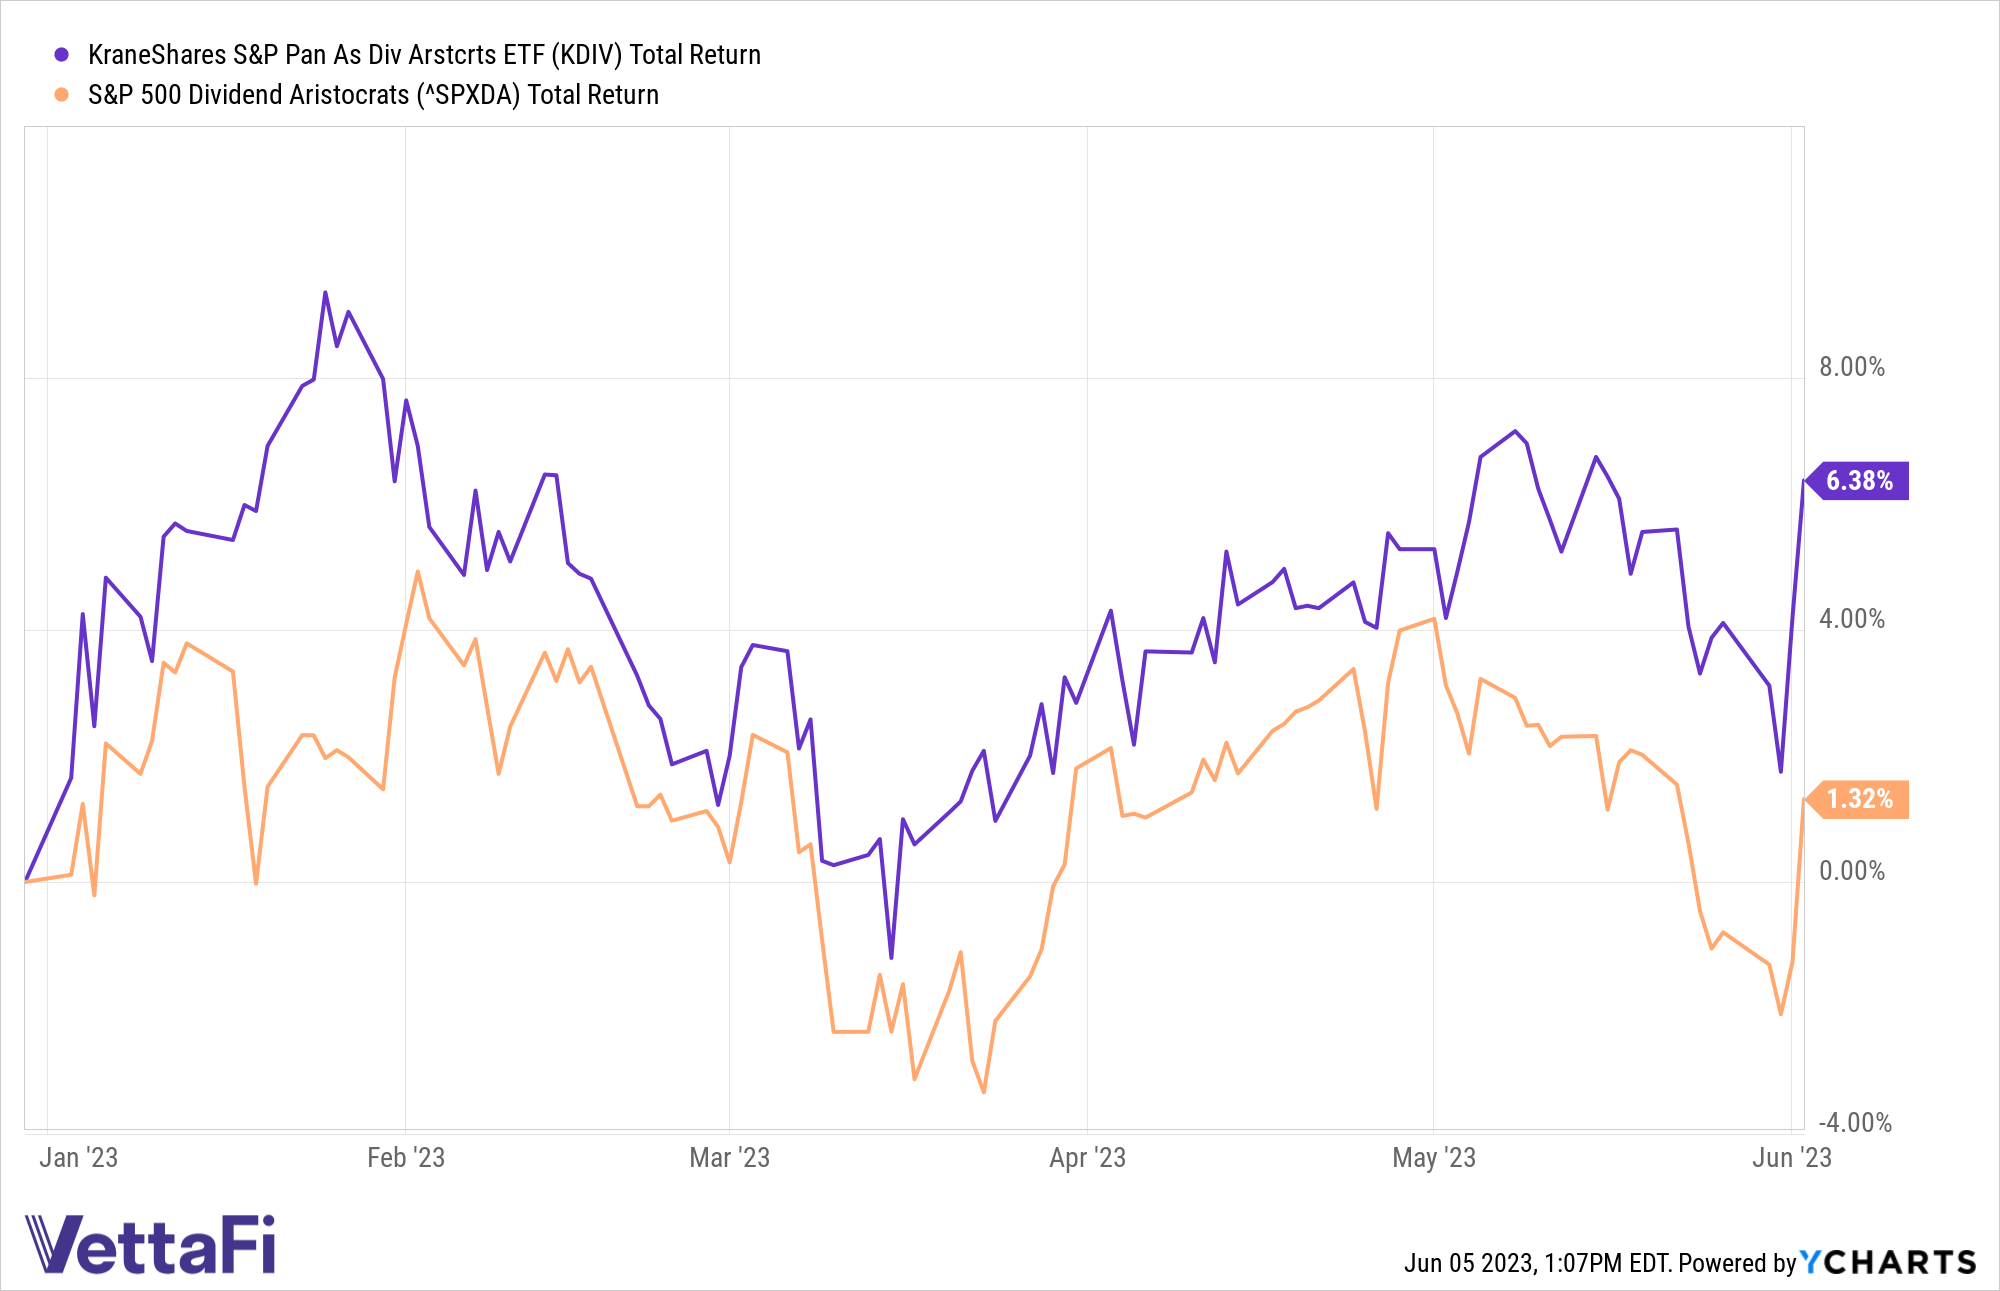 Chart of the total returns YTD for KDIV (6.38%) and the S&P 500 Dividend Aristocrats Index (1.32%)